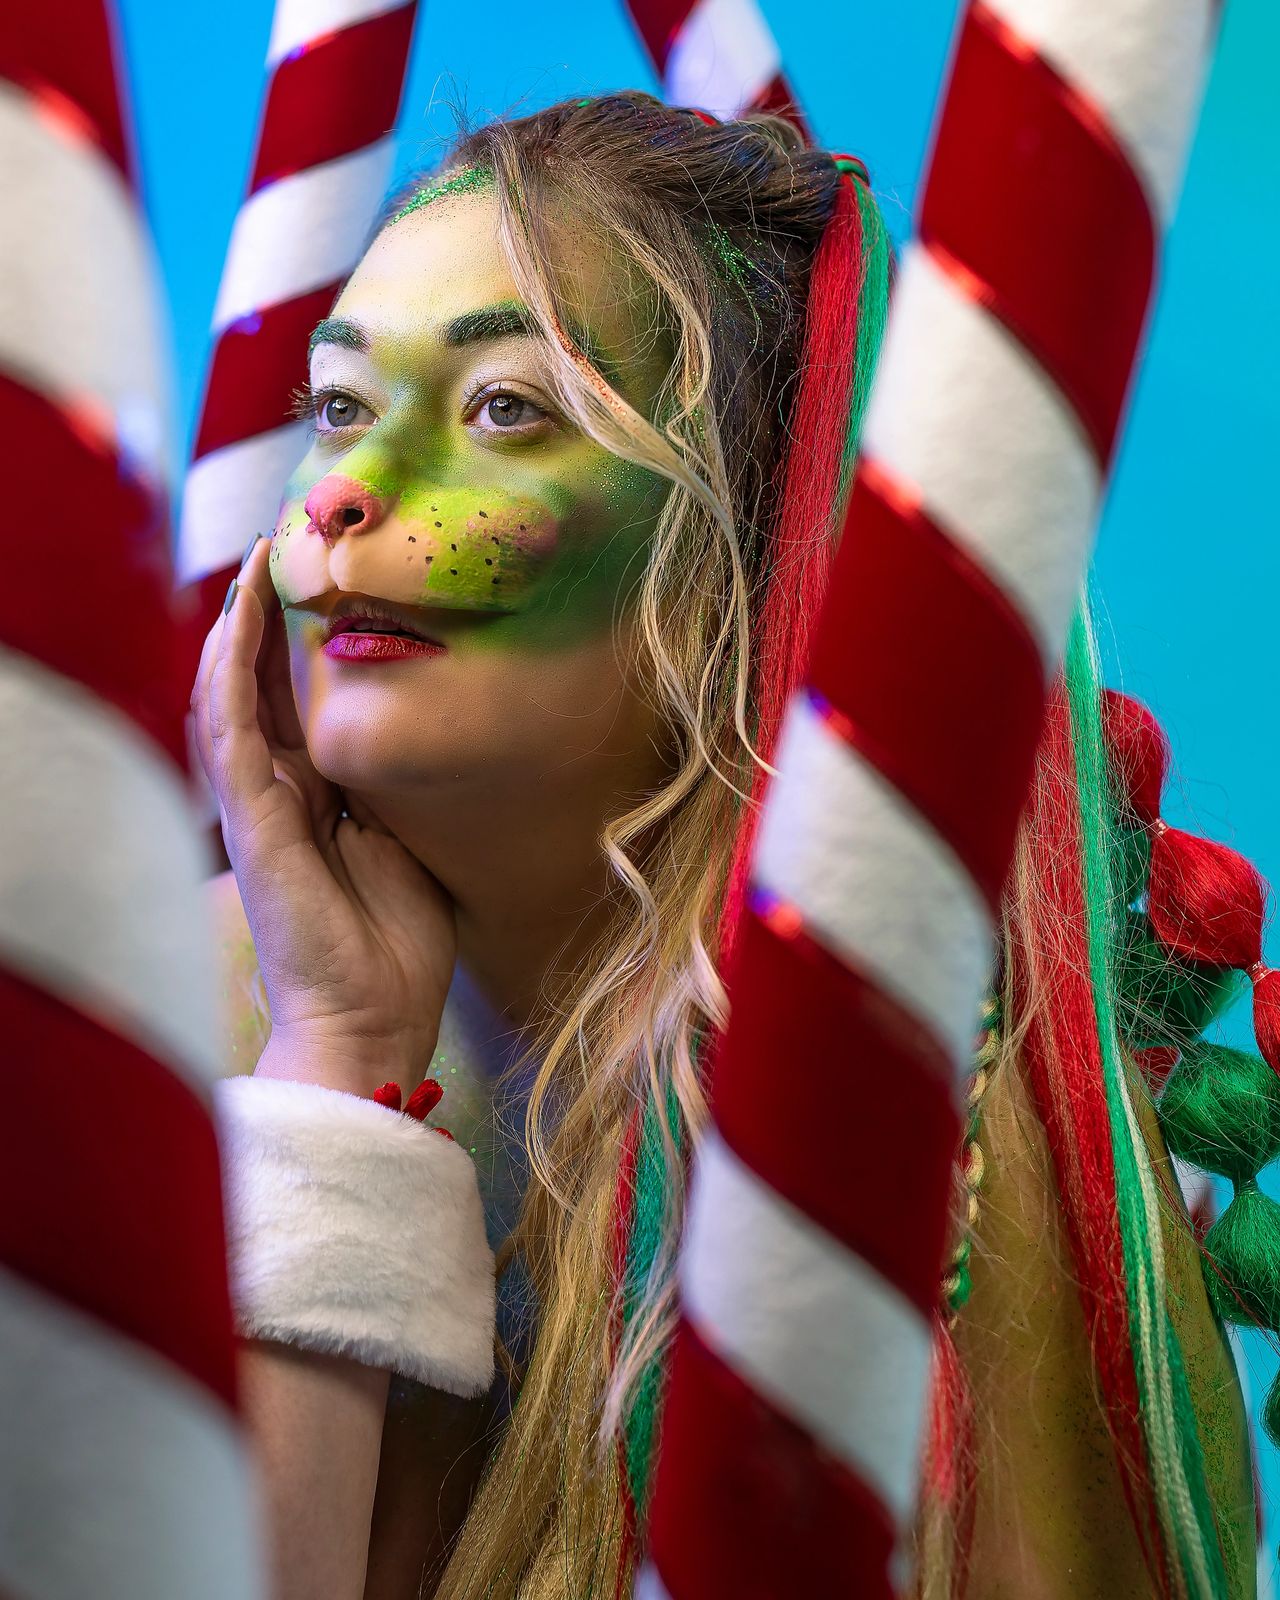 Merry Grinchmas: Makeup Editorial with Model Bethany Sevek